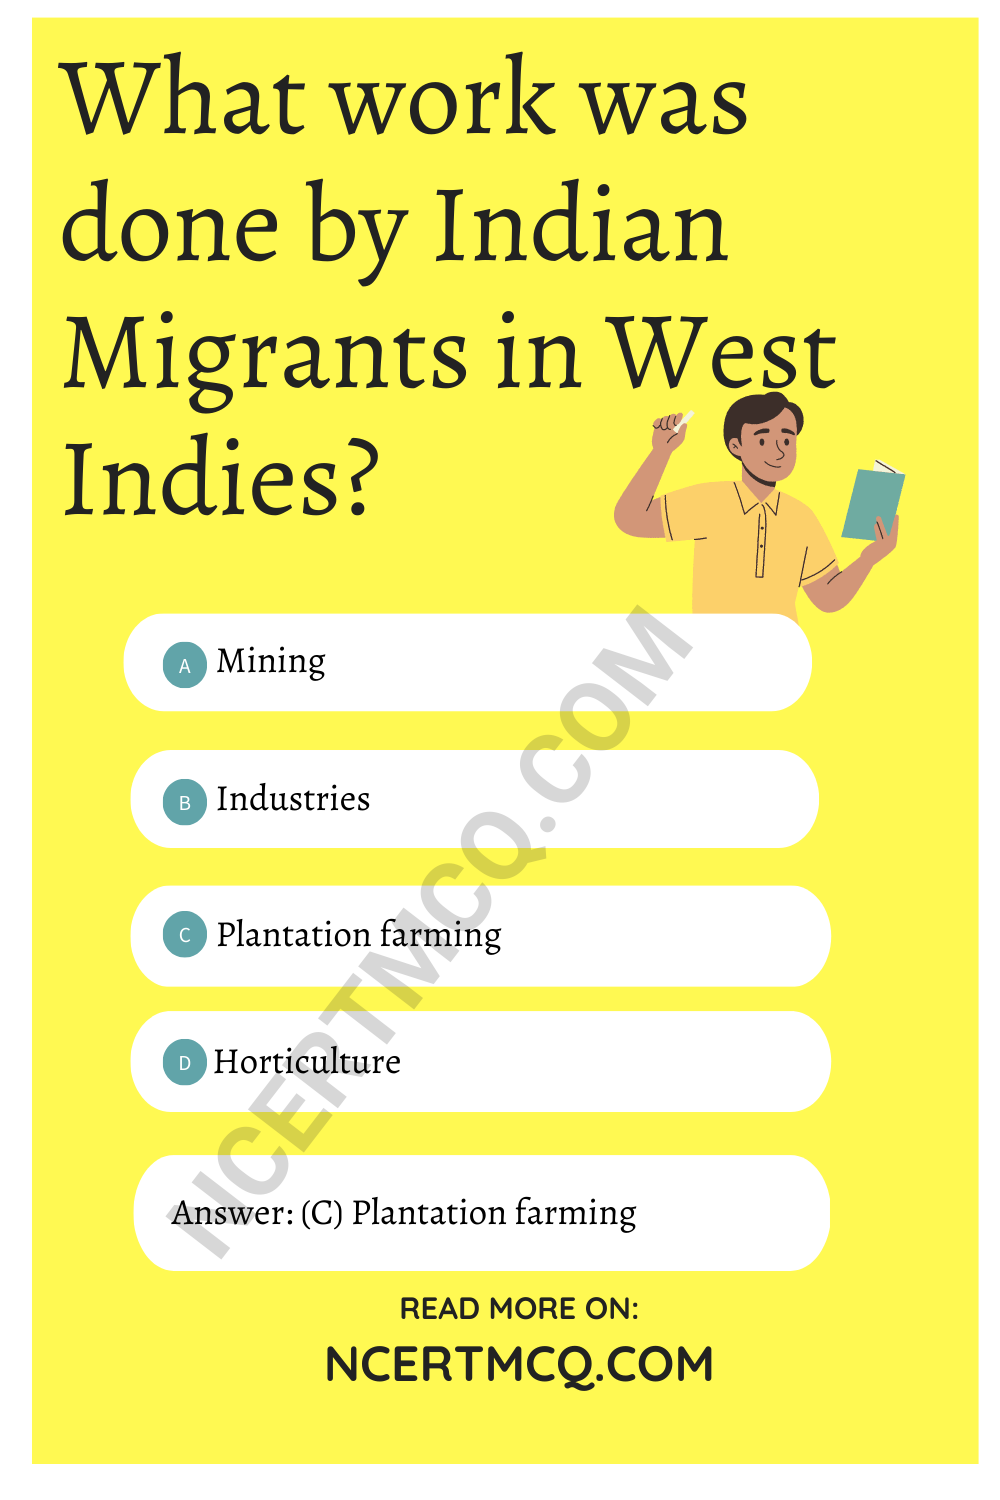 What work was done by Indian Migrants in West Indies?